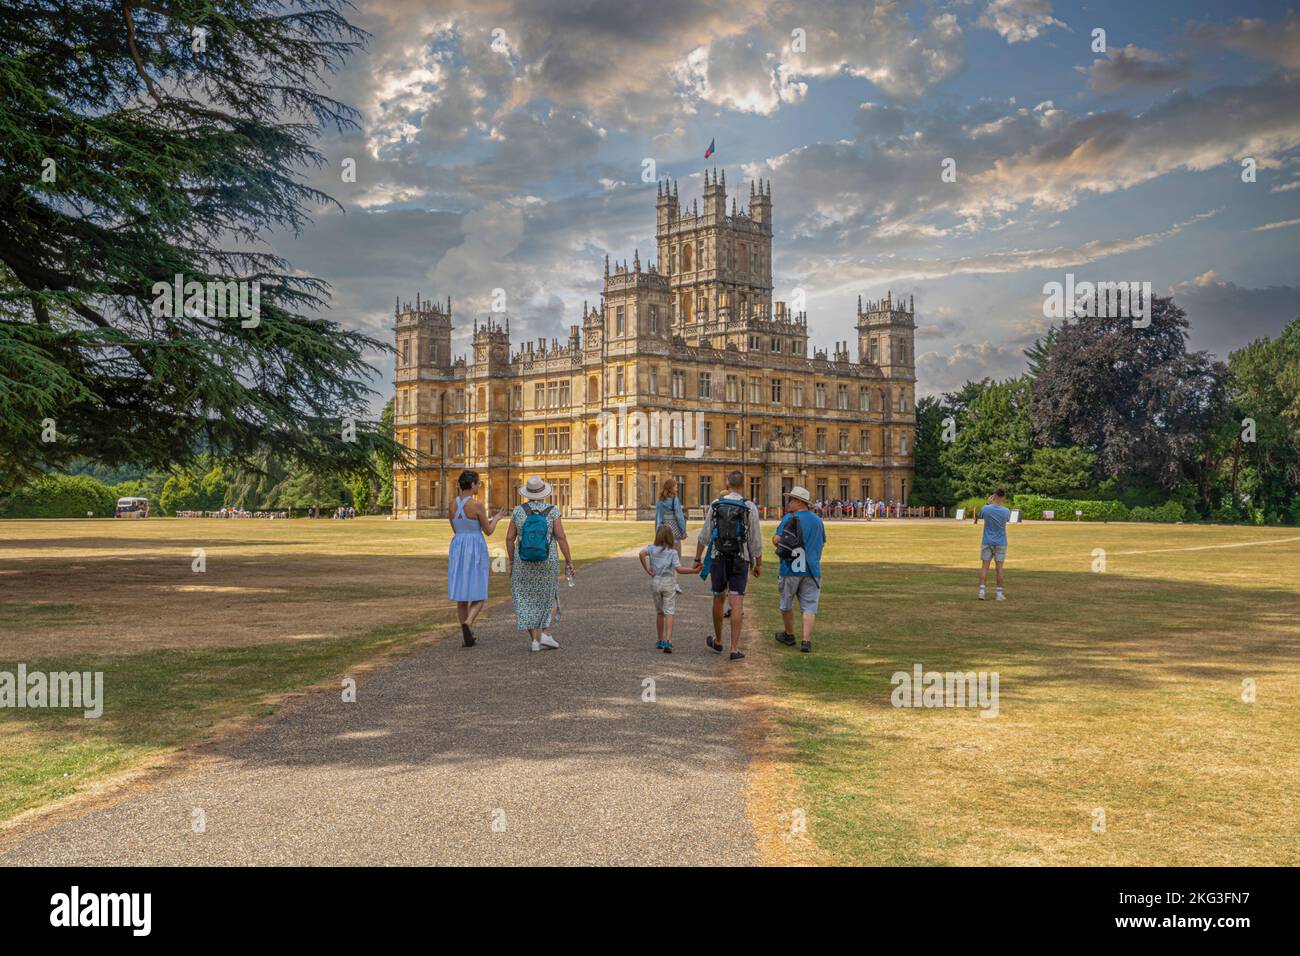 A warm summers day at the much visited and stunning Highclere Castle in Hampshire, home to the brilliant BBC TV series, Downton Abbey. Stock Photo